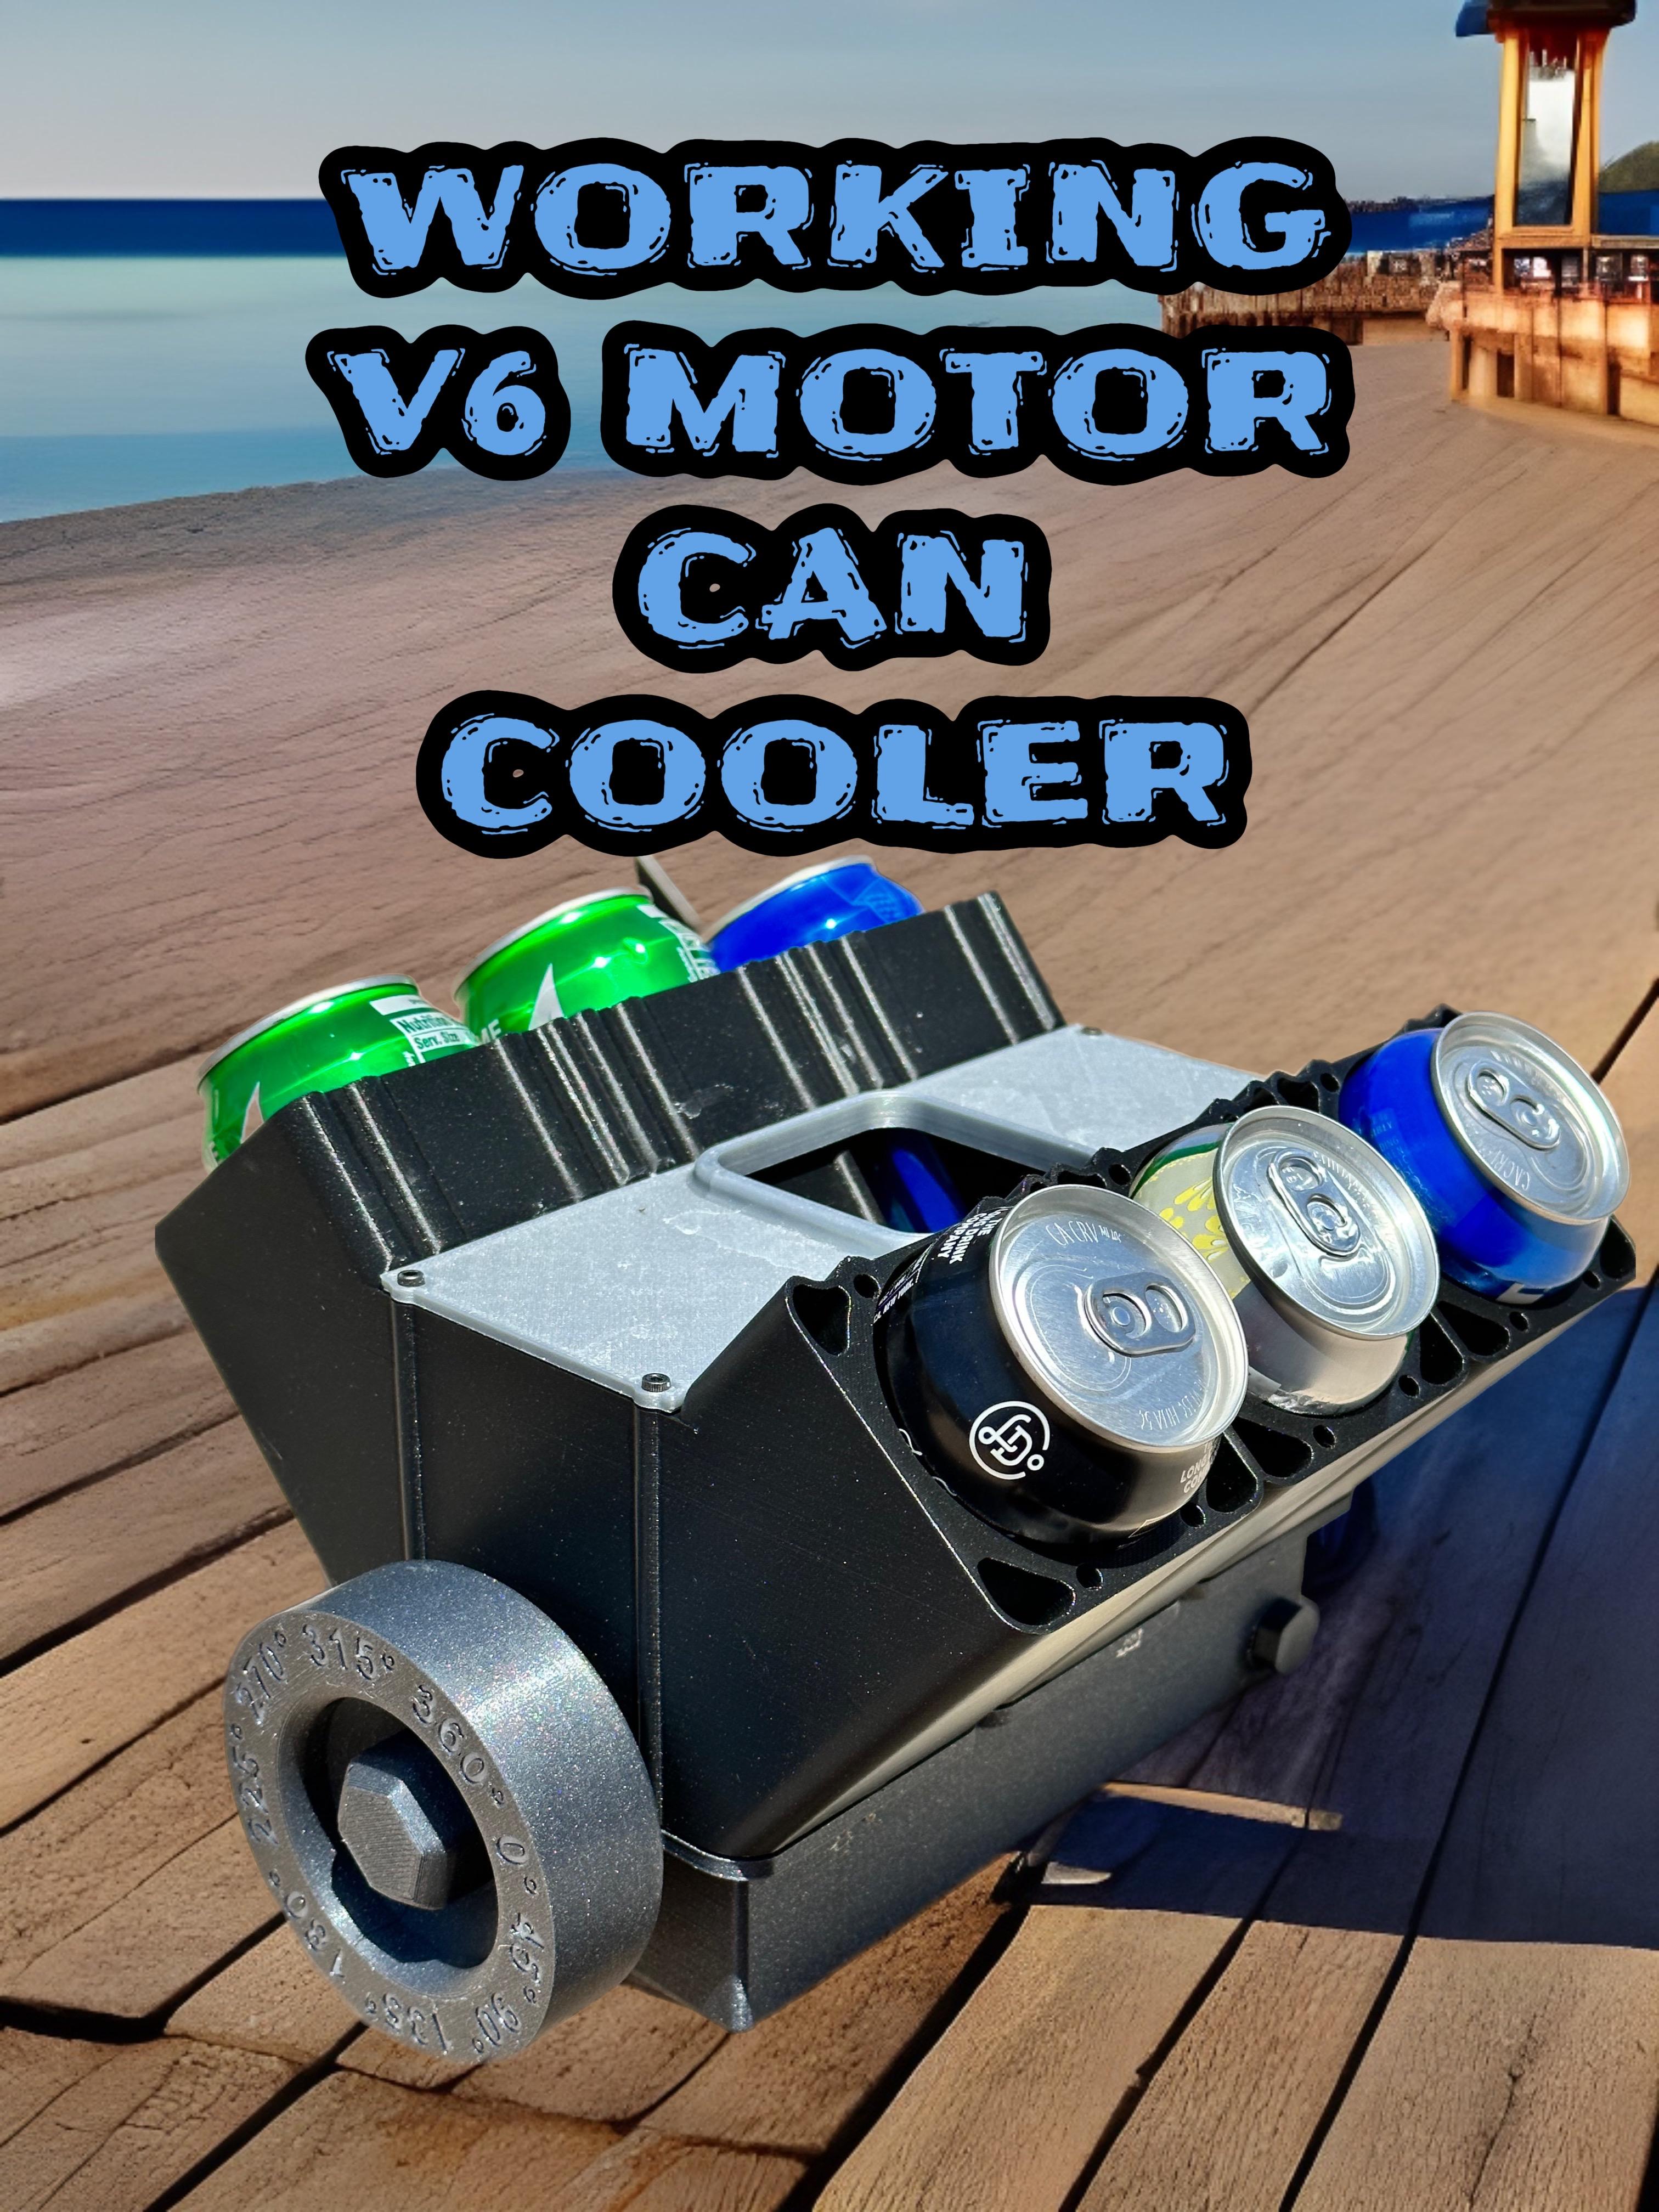 The Original V6 Can Cooler - With Working Crank!!! As seen on TIKTok @LS3DP 3d model